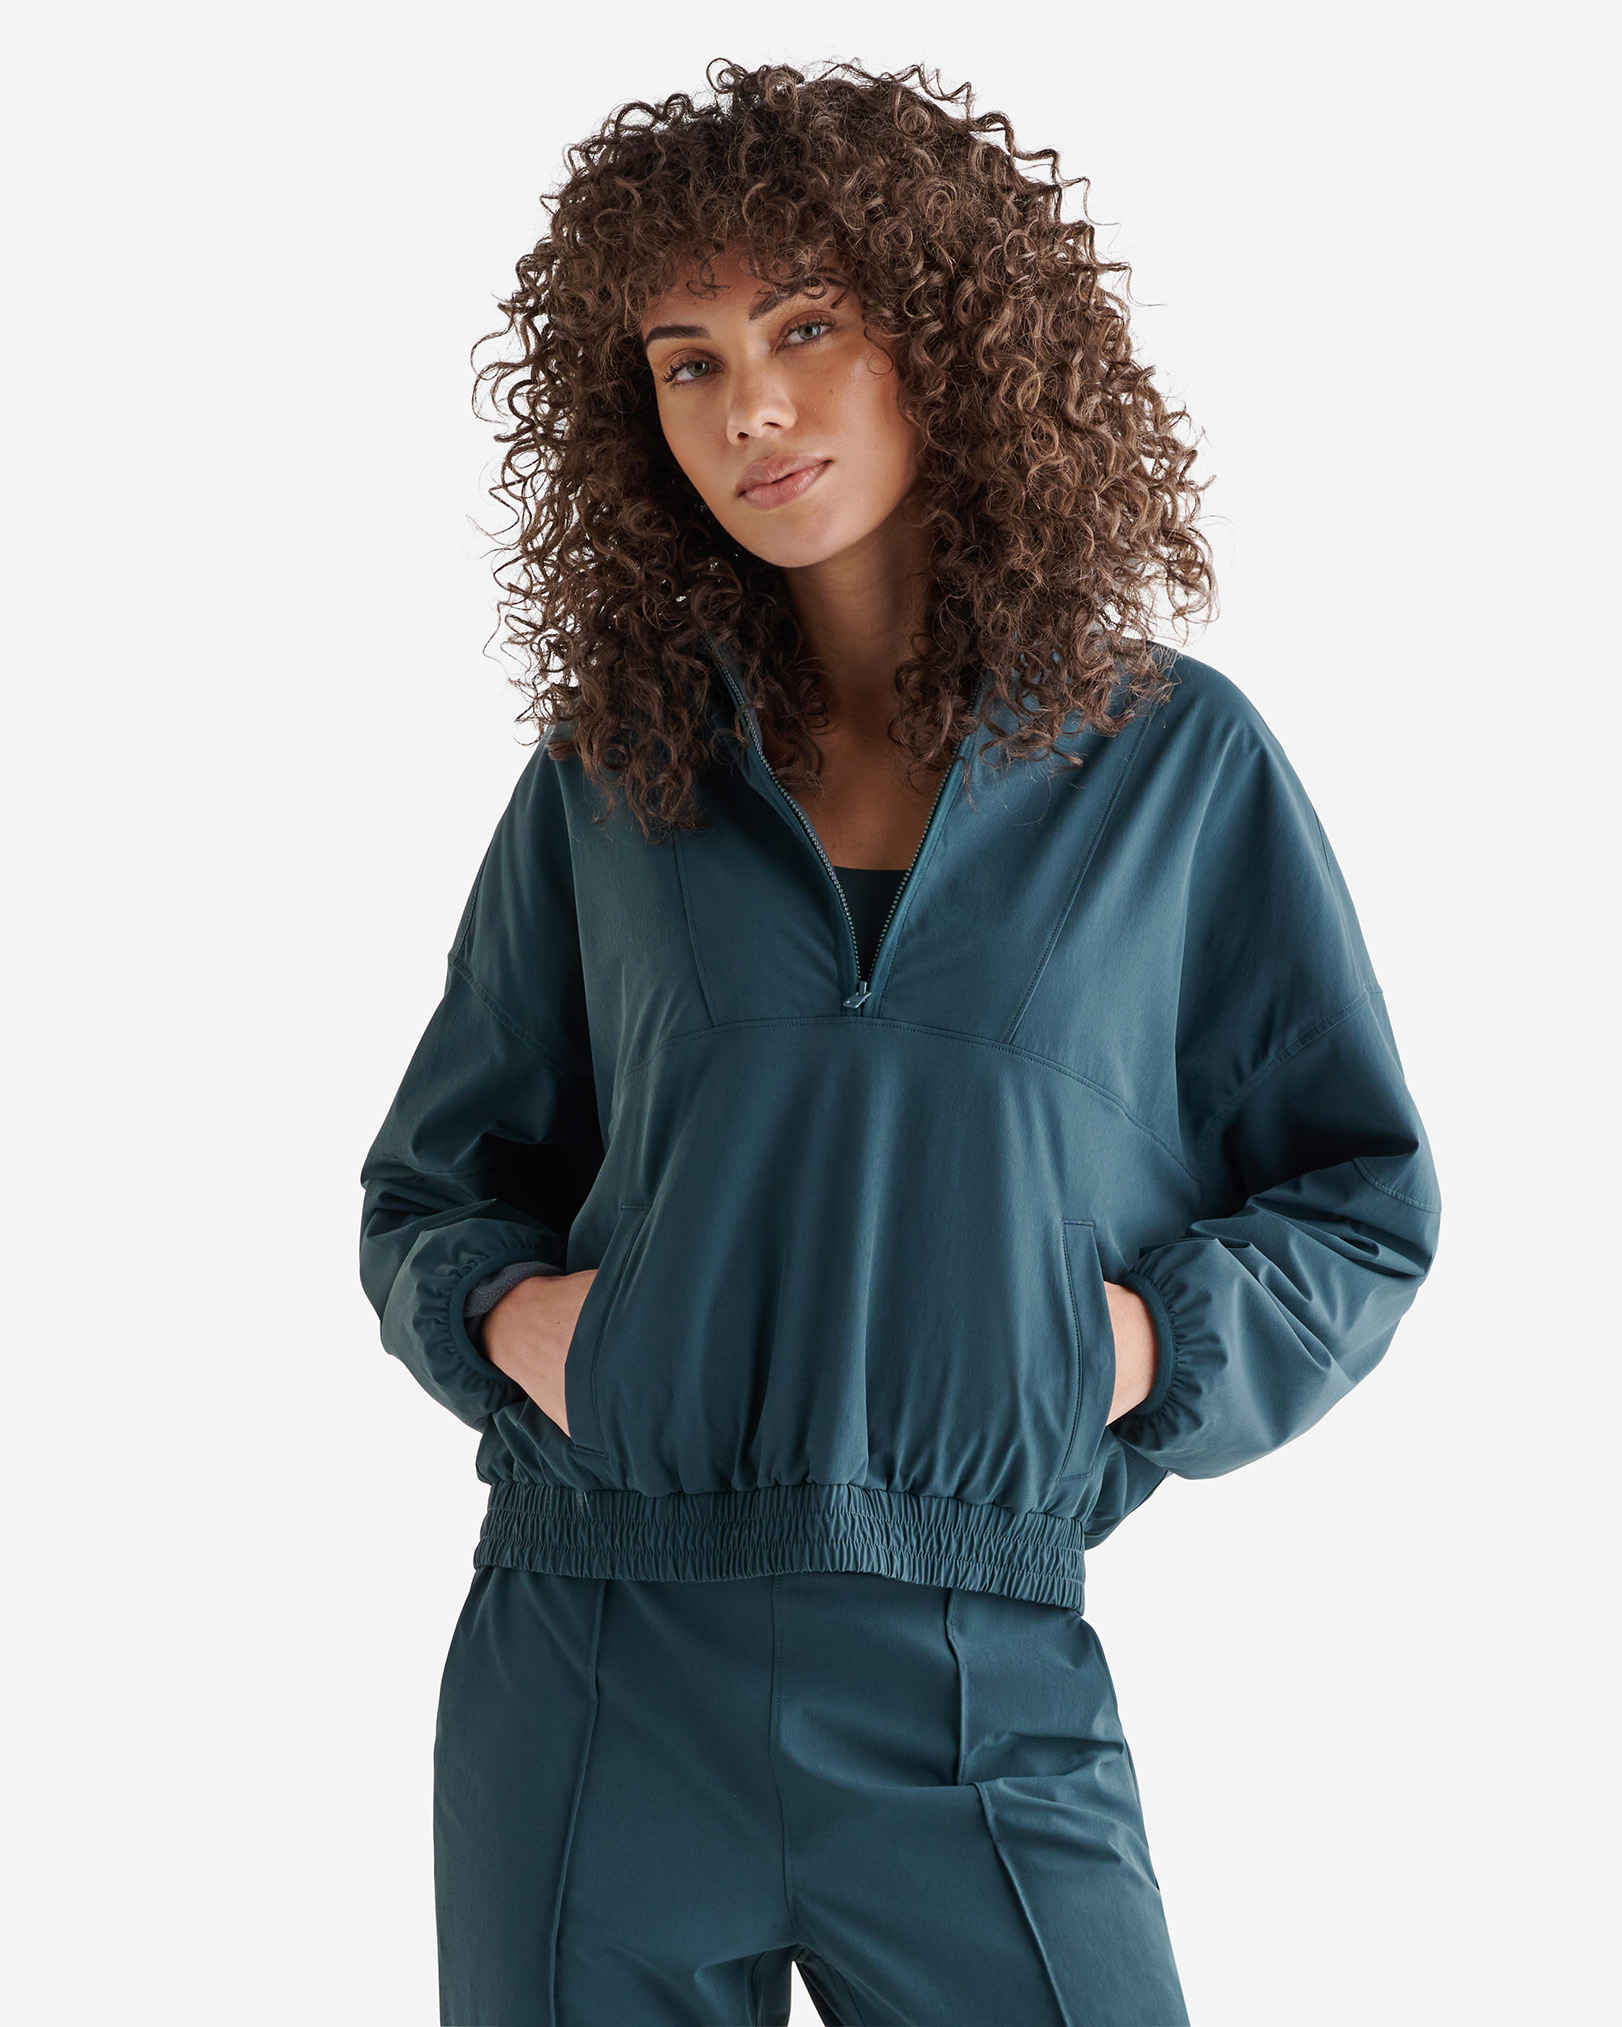 Roots Anywhere Half Zip Sweatshirt in Forest Teal